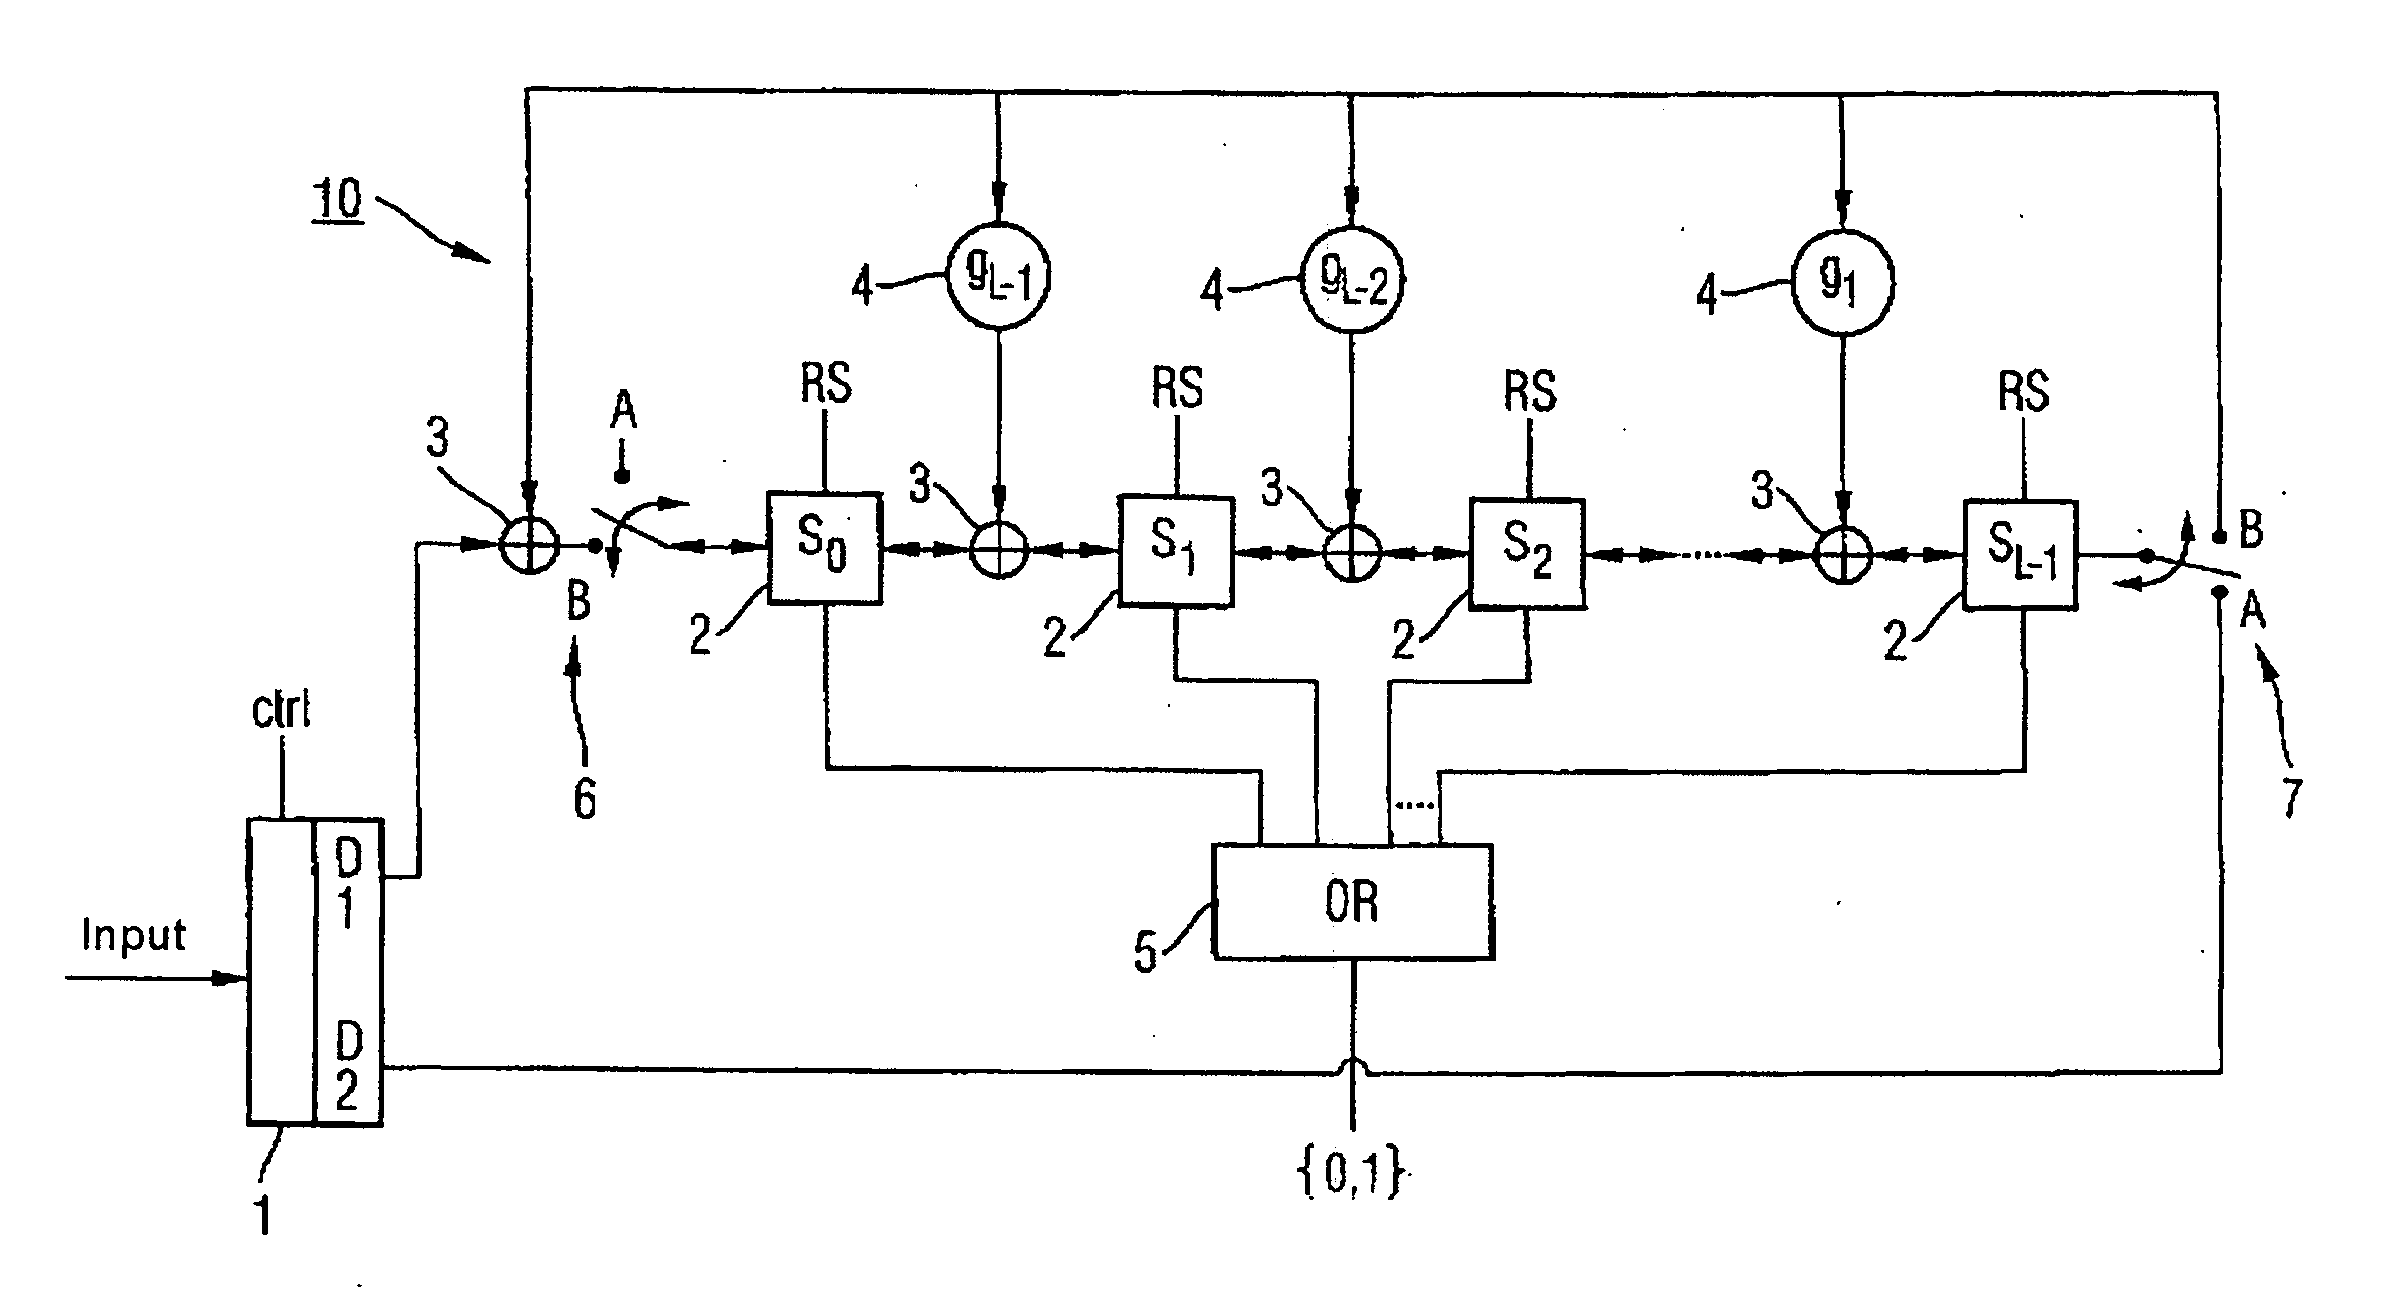 Parallel processing for decoding and cyclic redundancy checking for the reception of mobile radio signals